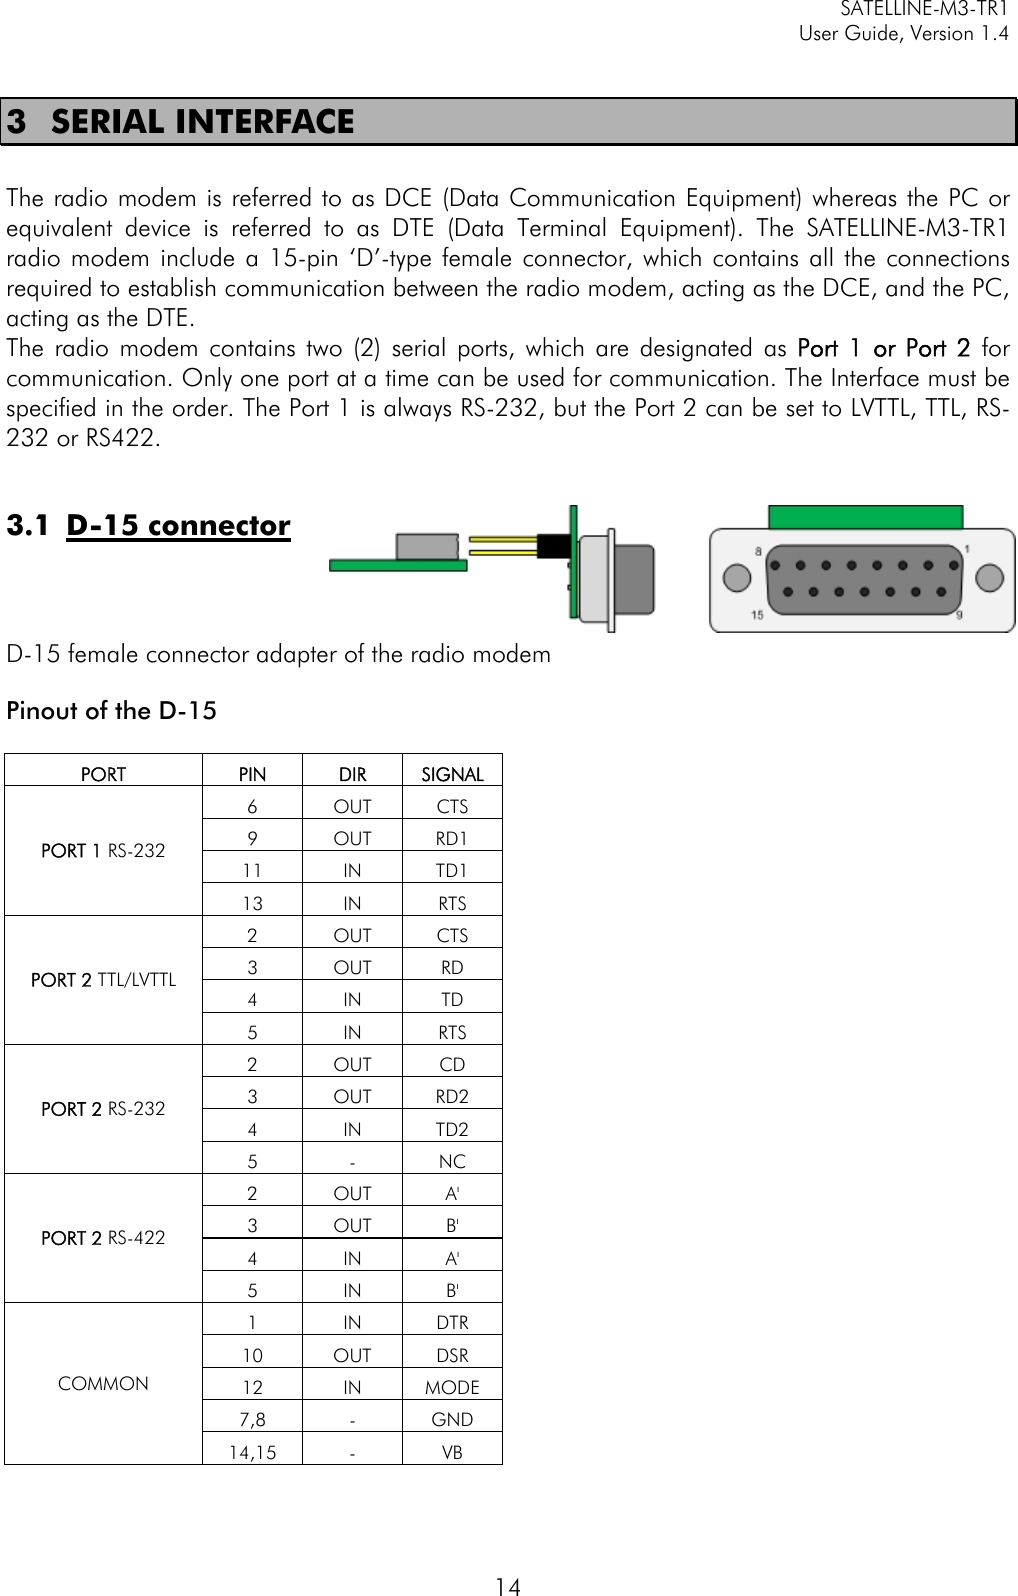   SATELLINE-M3-TR1     User Guide, Version 1.4   14 3 SERIAL INTERFACE  The radio modem is referred to as DCE (Data Communication Equipment) whereas the PC or equivalent device is referred to as DTE (Data Terminal Equipment). The SATELLINE-M3-TR1  radio modem include a 15-pin ‘D’-type female connector, which contains all the connections required to establish communication between the radio modem, acting as the DCE, and the PC, acting as the DTE. The radio modem contains two (2) serial ports, which are designated as Port 1 or Port 2 for communication. Only one port at a time can be used for communication. The Interface must be specified in the order. The Port 1 is always RS-232, but the Port 2 can be set to LVTTL, TTL, RS-232 or RS422.  3.1 D-15 connector    D-15 female connector adapter of the radio modem  Pinout of the D-15  PORT PIN DIR SIGNAL PORT 1 RS-232 6 OUT CTS 9 OUT RD1 11 IN TD1 13 IN RTS PORT 2 TTL/LVTTL 2 OUT CTS 3 OUT RD 4 IN TD 5 IN RTS PORT 2 RS-232 2 OUT CD 3 OUT RD2 4 IN TD2 5 - NC PORT 2 RS-422 2 OUT A&apos; 3 OUT B&apos; 4 IN A&apos; 5 IN B&apos; COMMON 1 IN DTR 10 OUT DSR 12 IN MODE 7,8 - GND 14,15 -  VB   